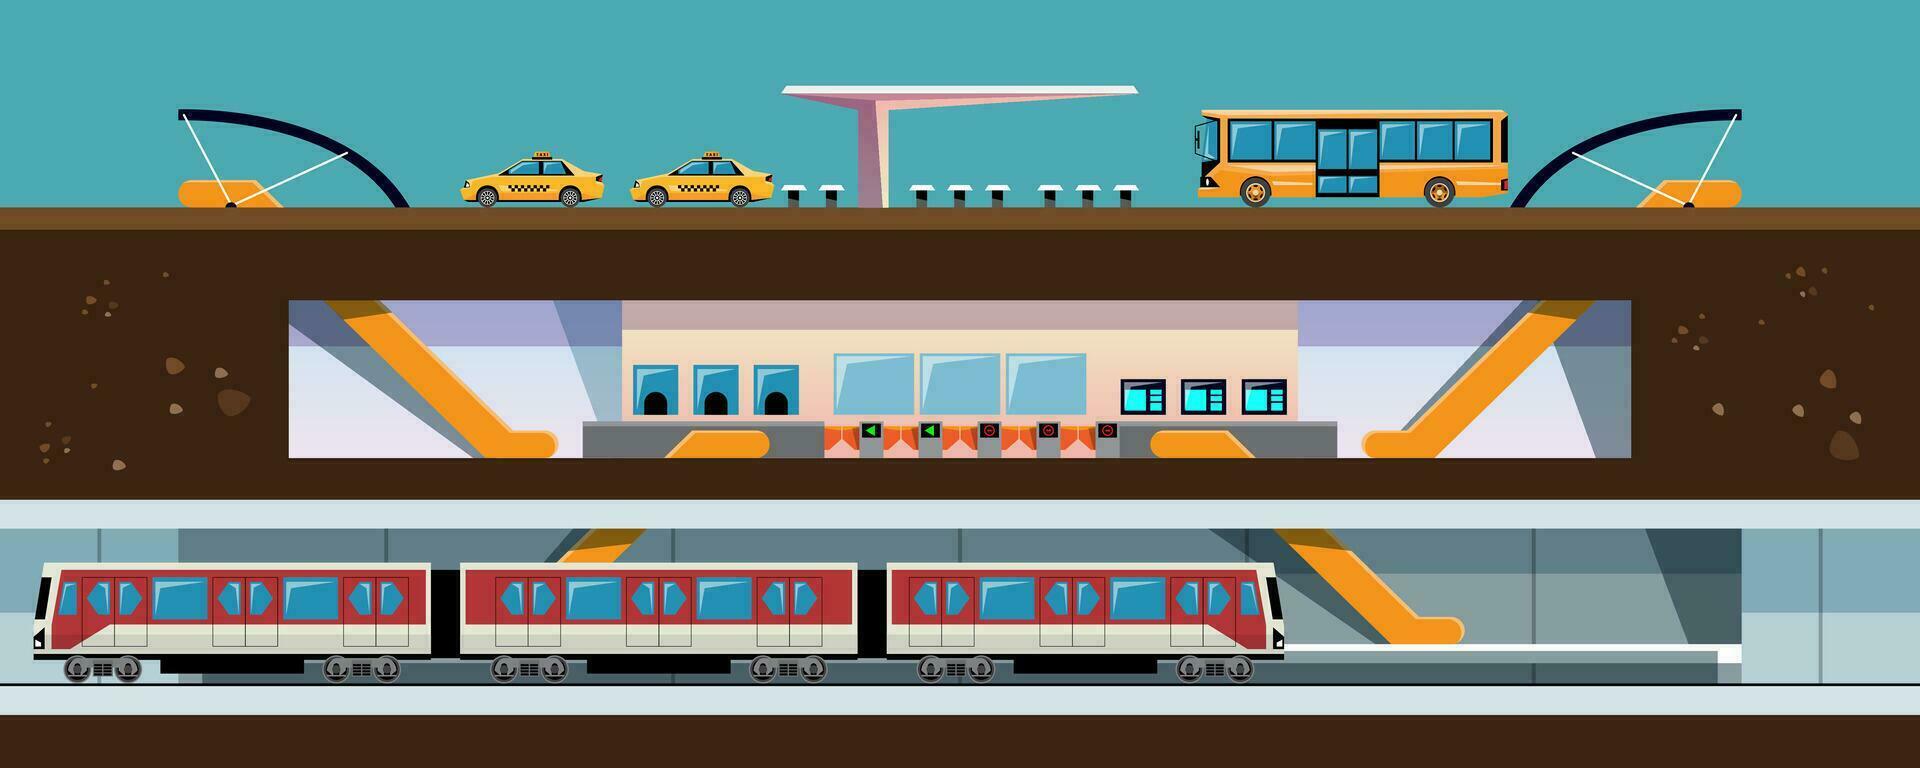 Mass Transport In The City, Bus and Subway or Underground. vector